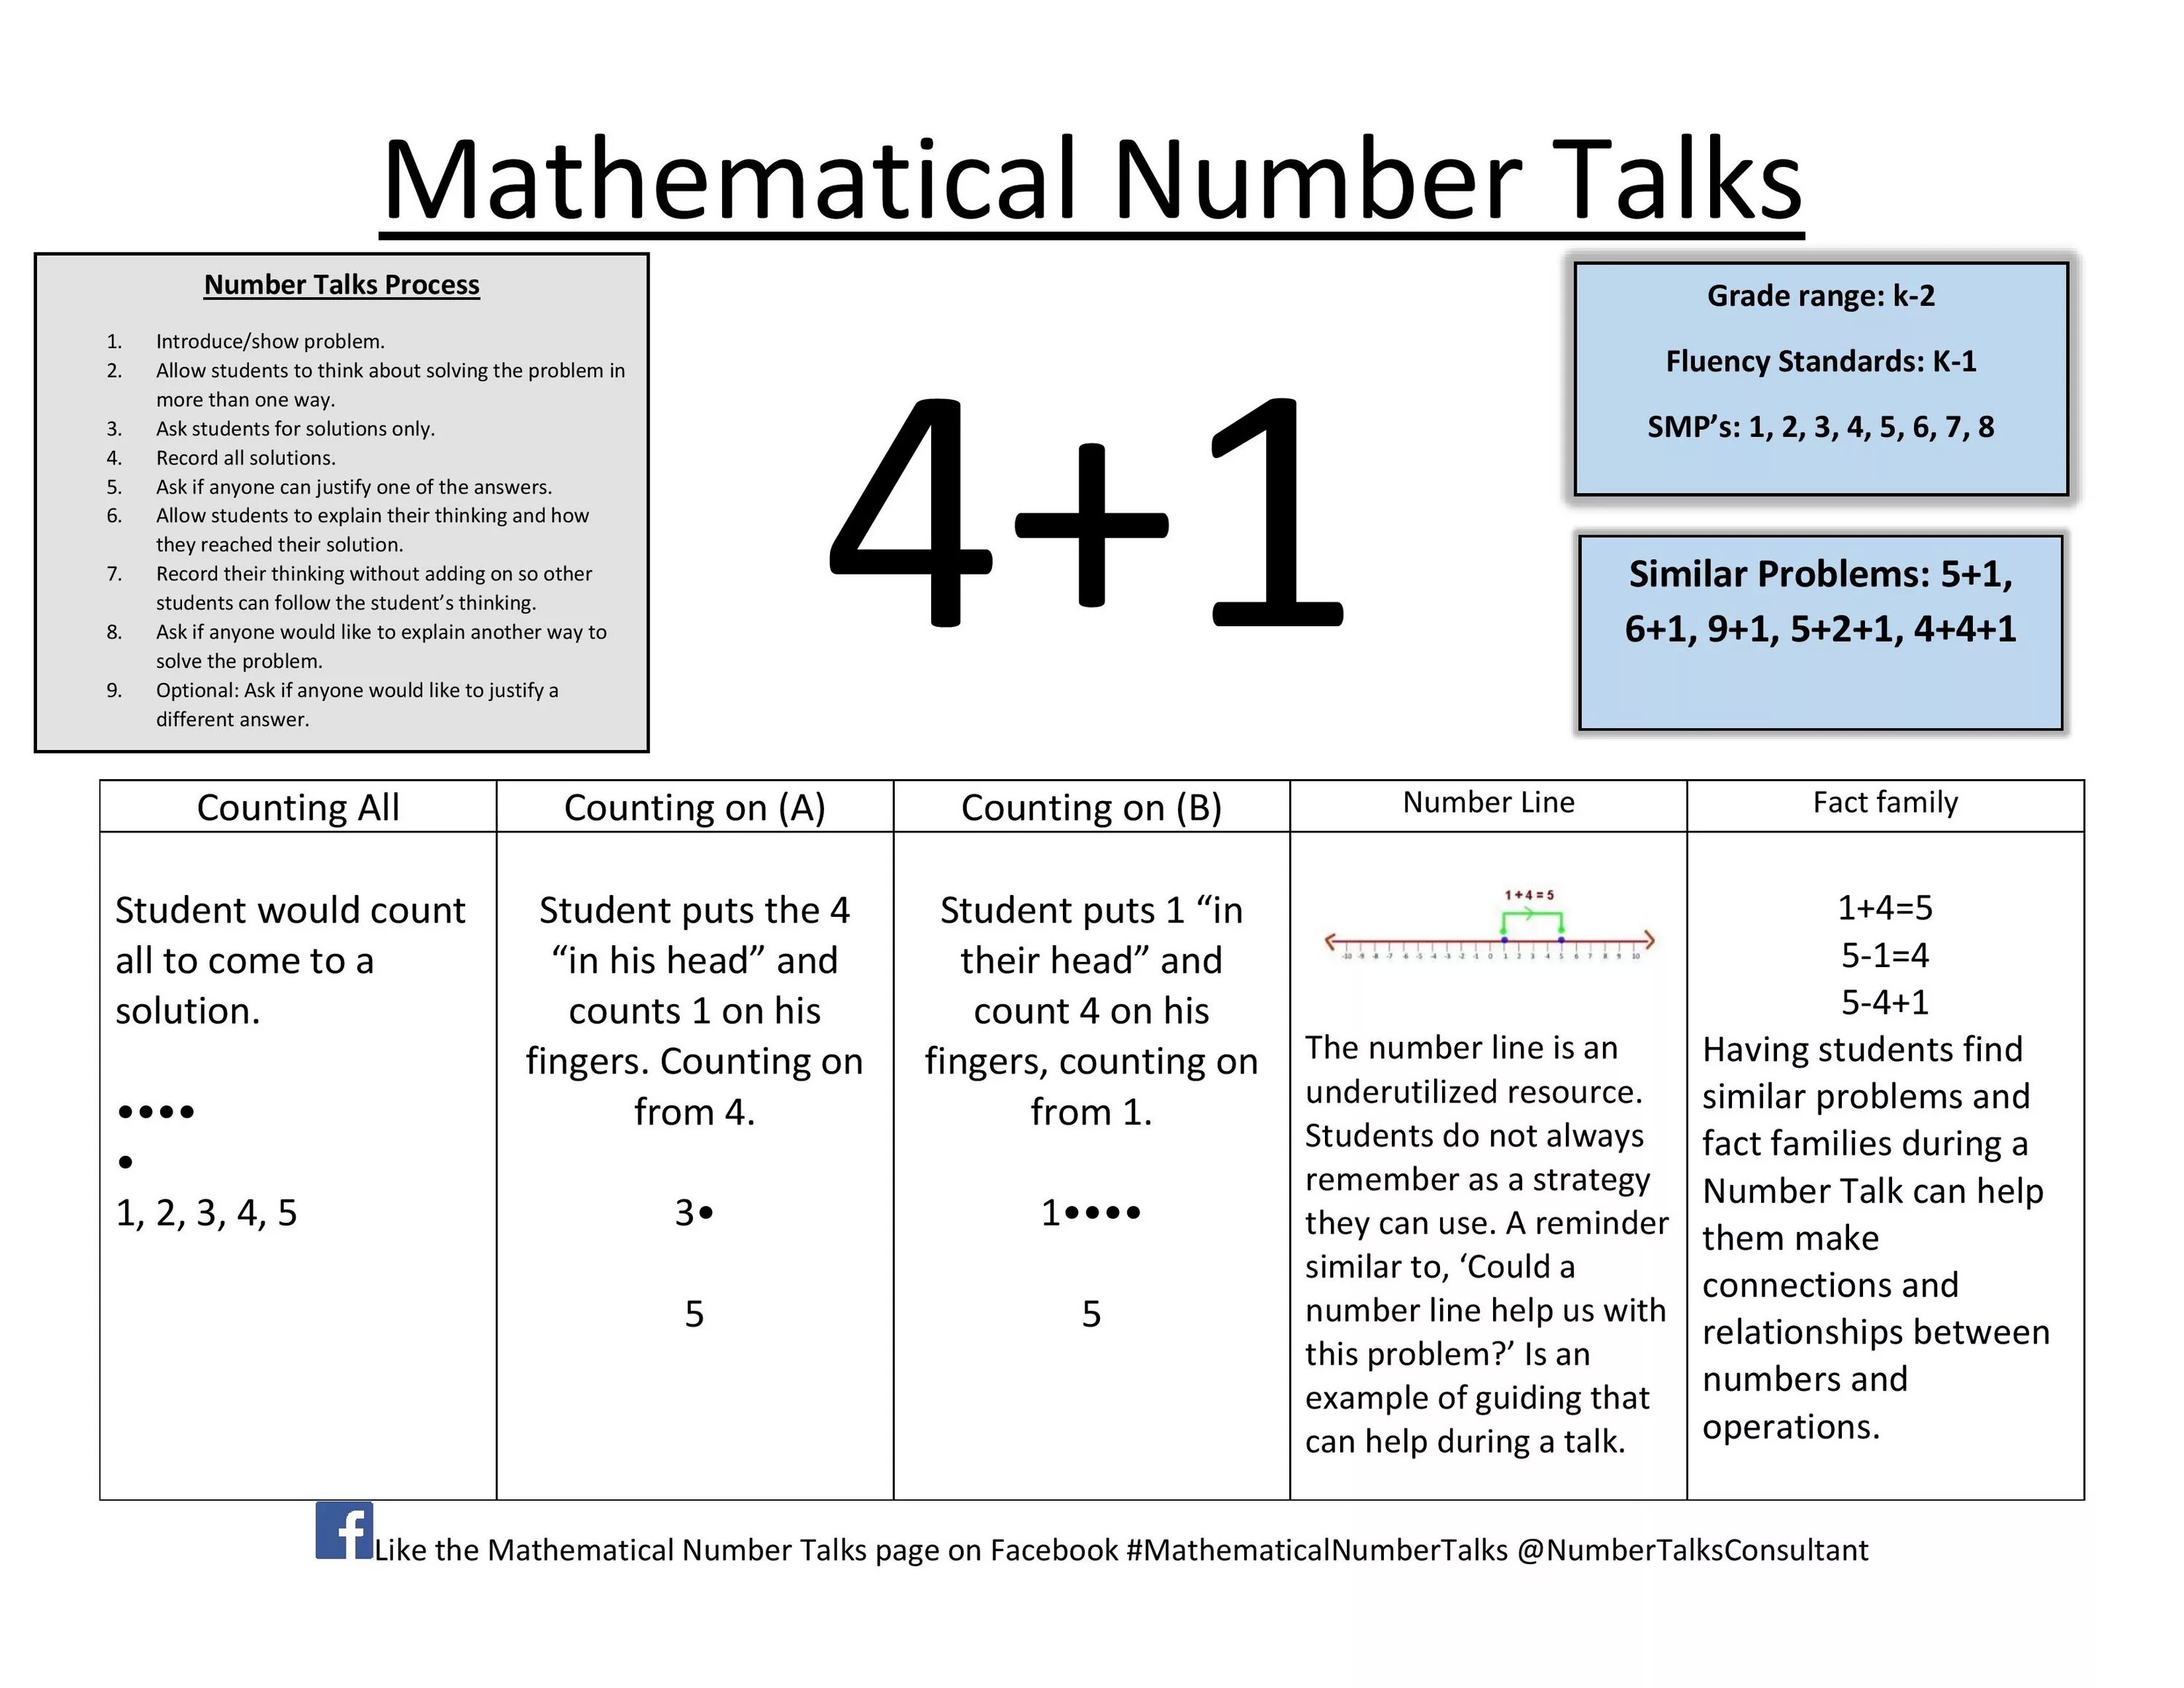 Number plans. Numbers in Mathematics. Whole number in Math. Regulations of numbers в математике. Talking about numbers.